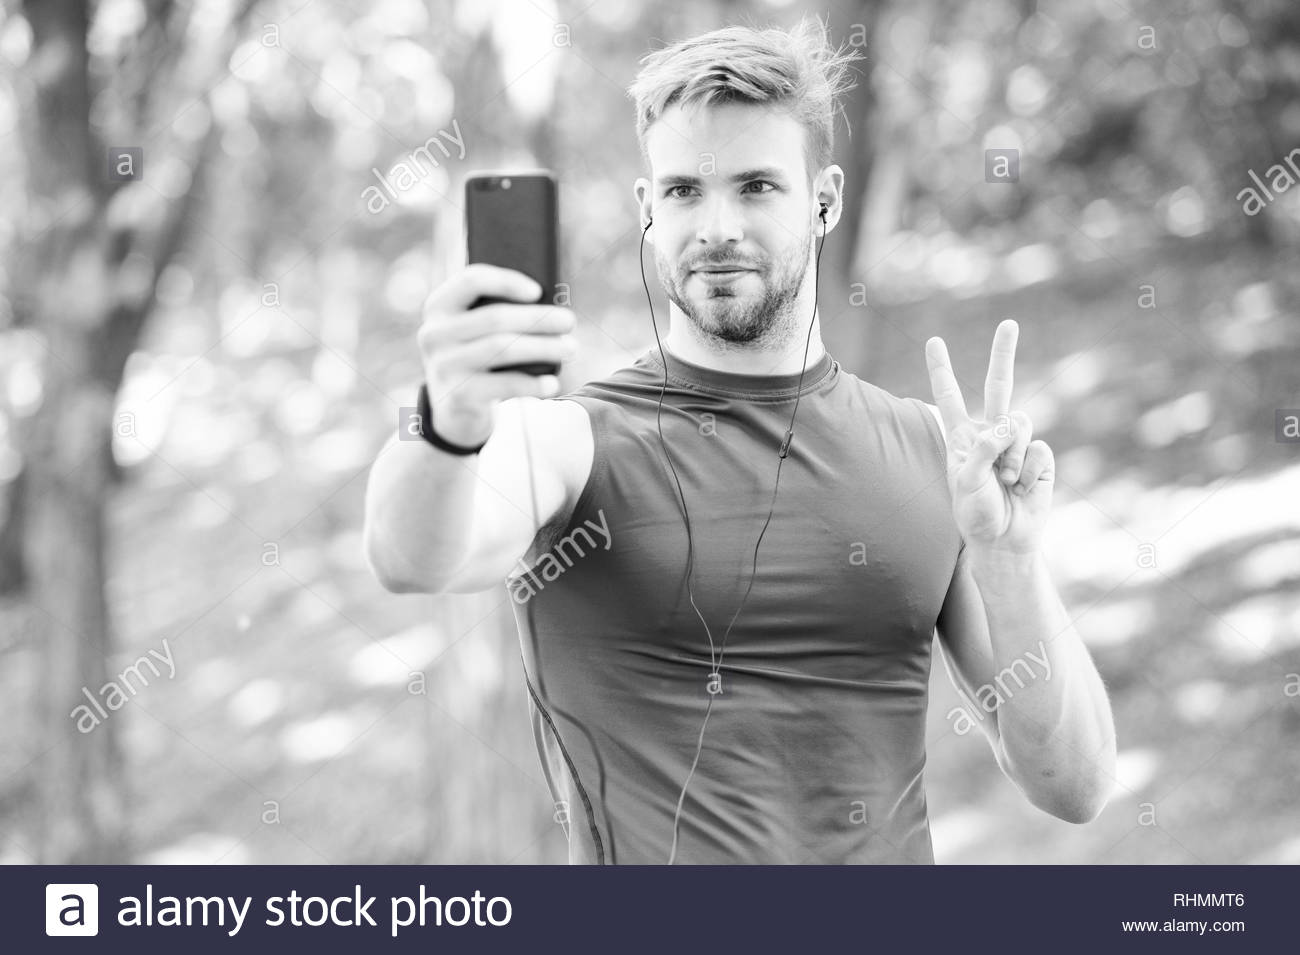 Man Athlete Concentrated Face Take Smartphone Photo Nature